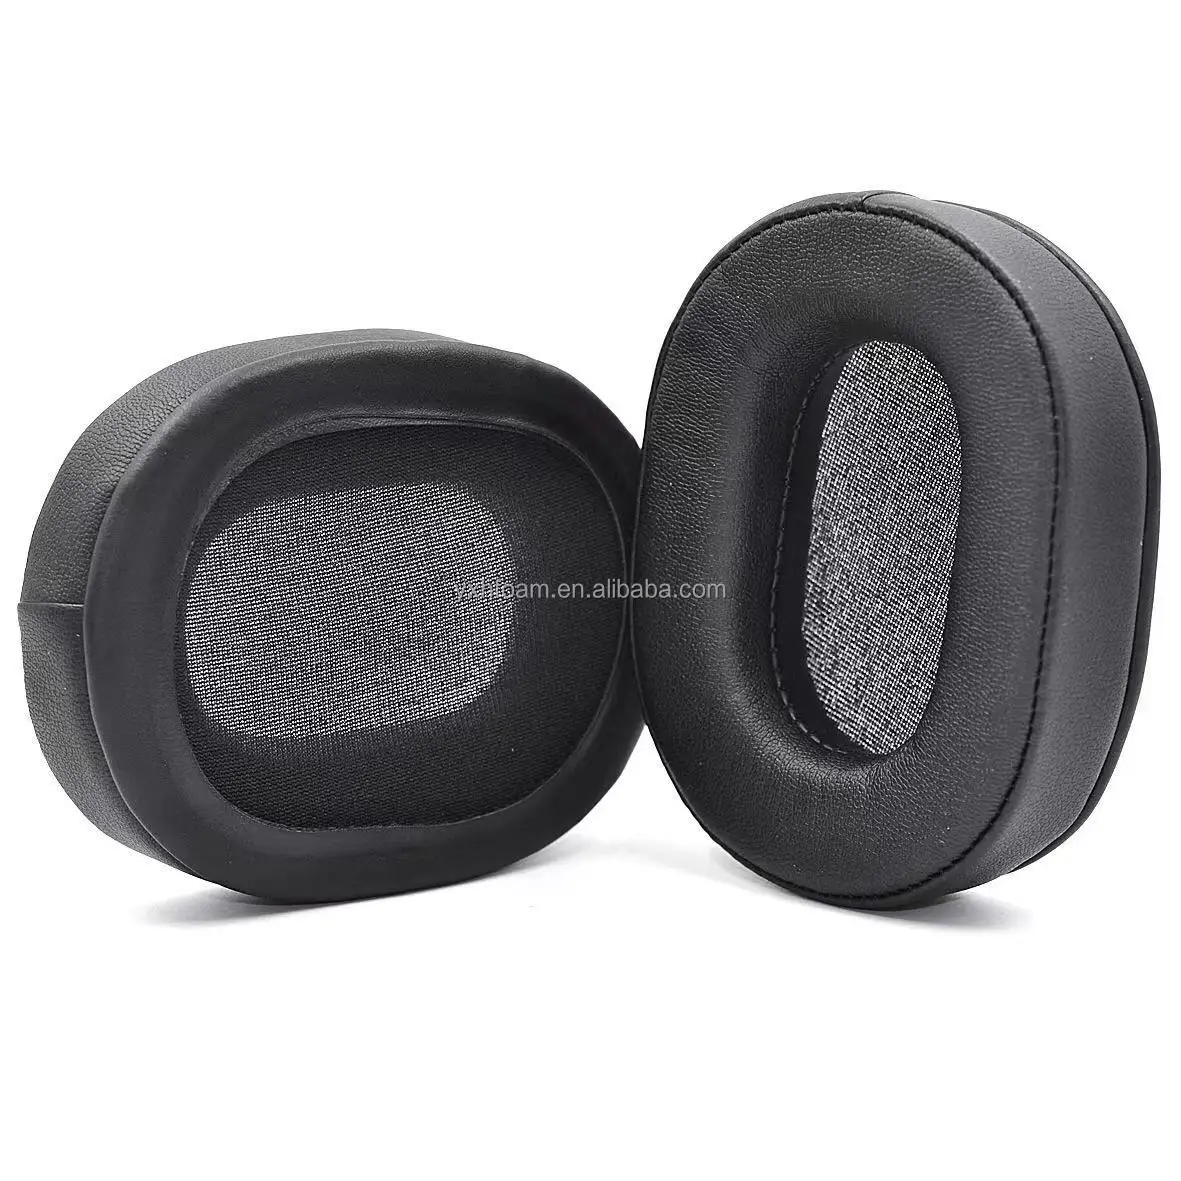 

Free Shipping Earpads Replacement Ear Cushion for jbl live 650bt nc headphone, Black grey brown and so on